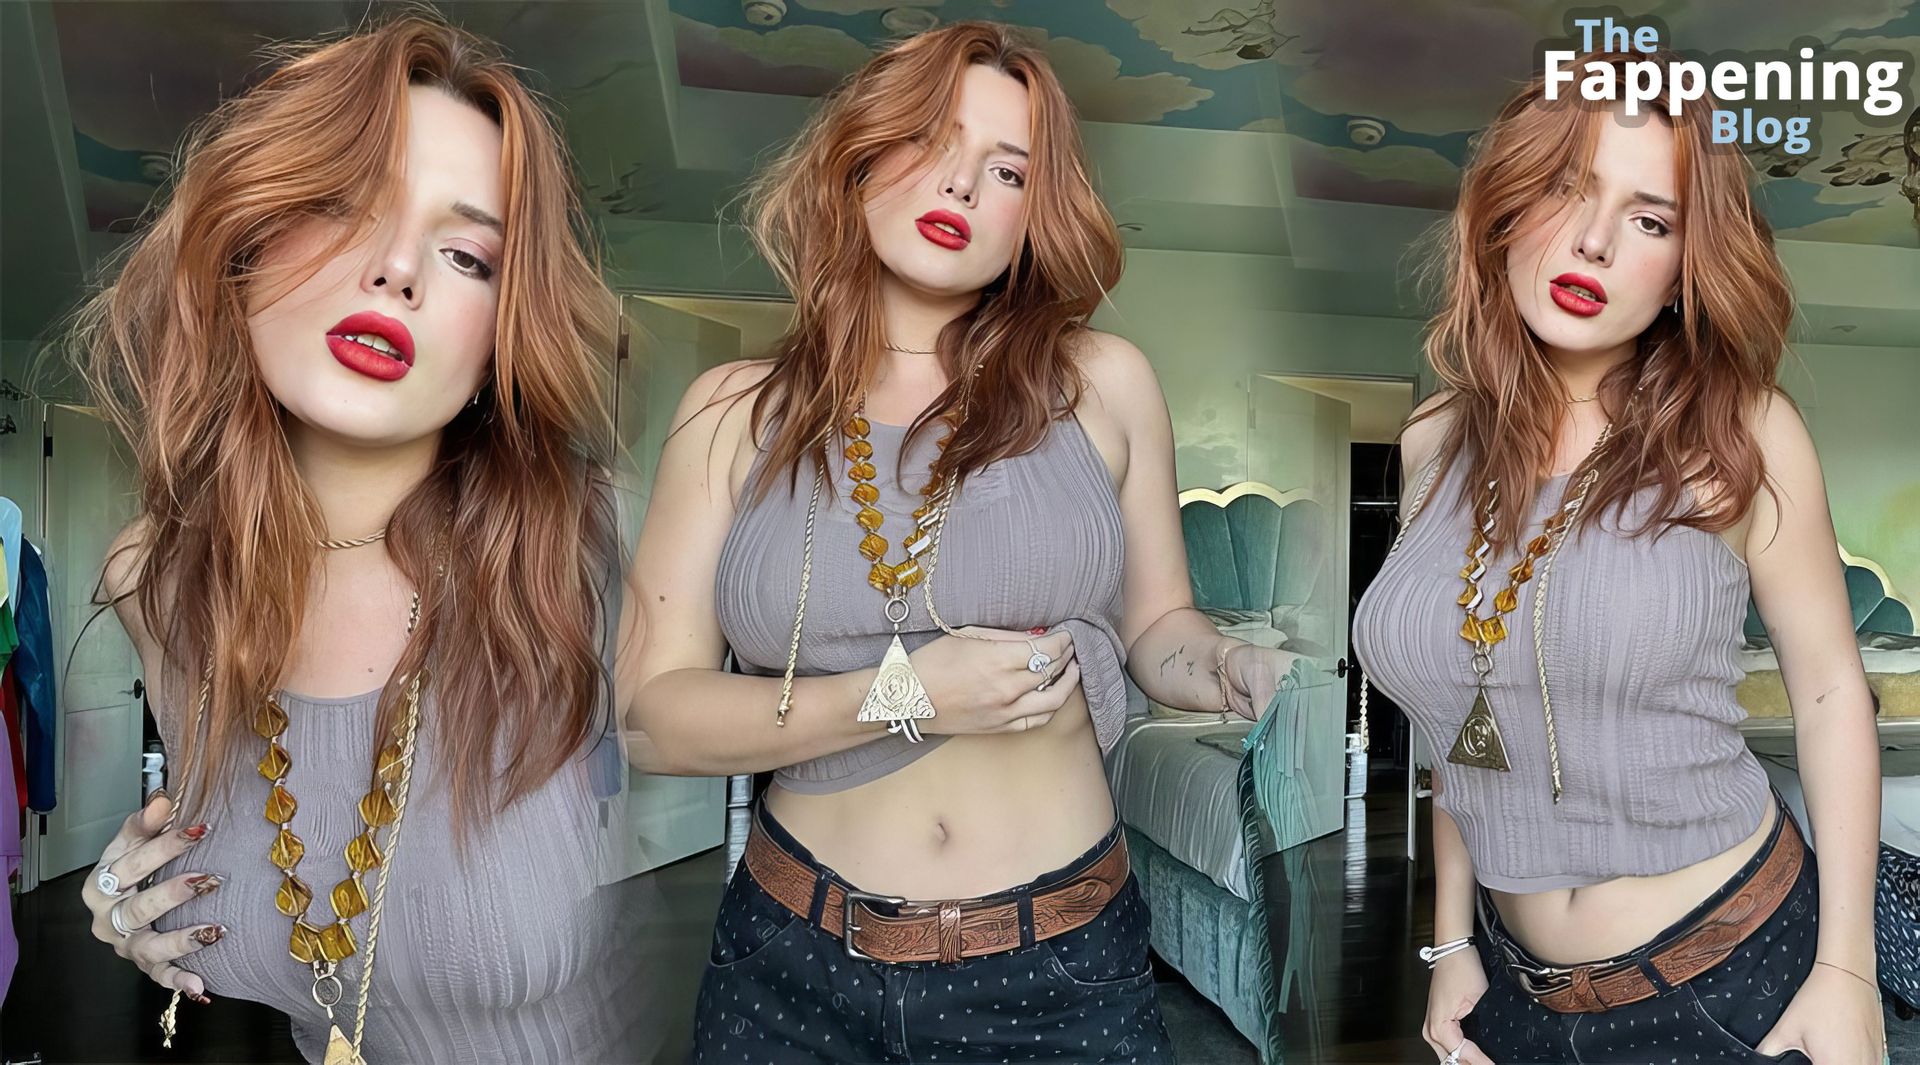 Bella-Thorne-Gorgeous-and-Busty-2-thefappeningblog.com_.jpg